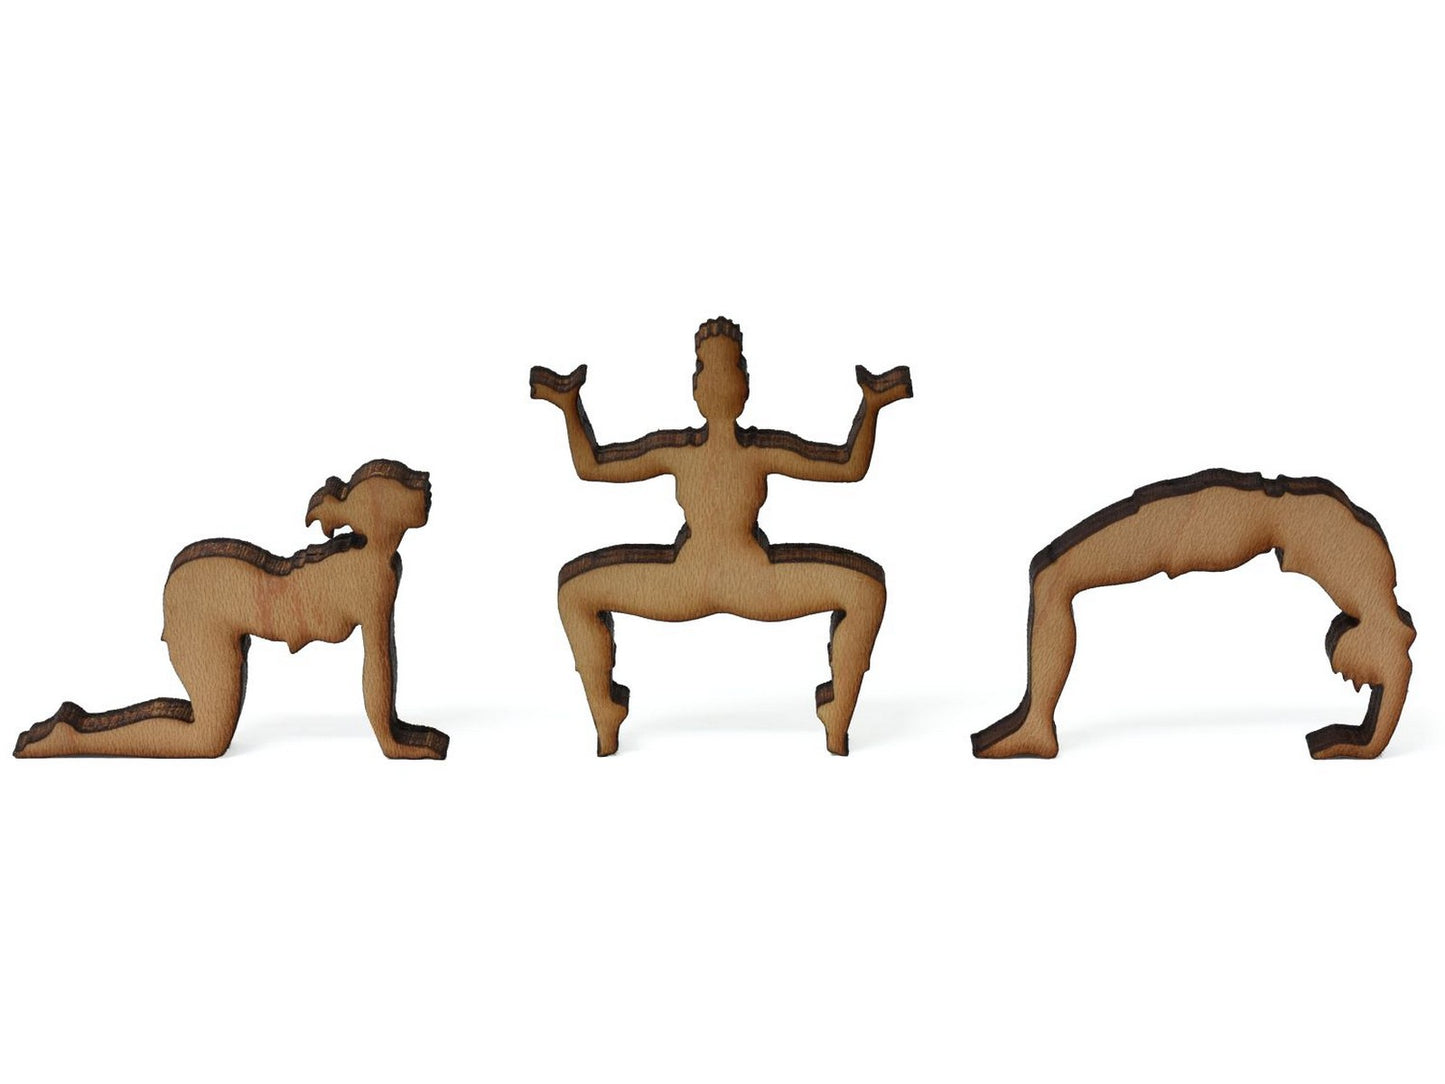 A closeup of pieces showing different yoga poses.